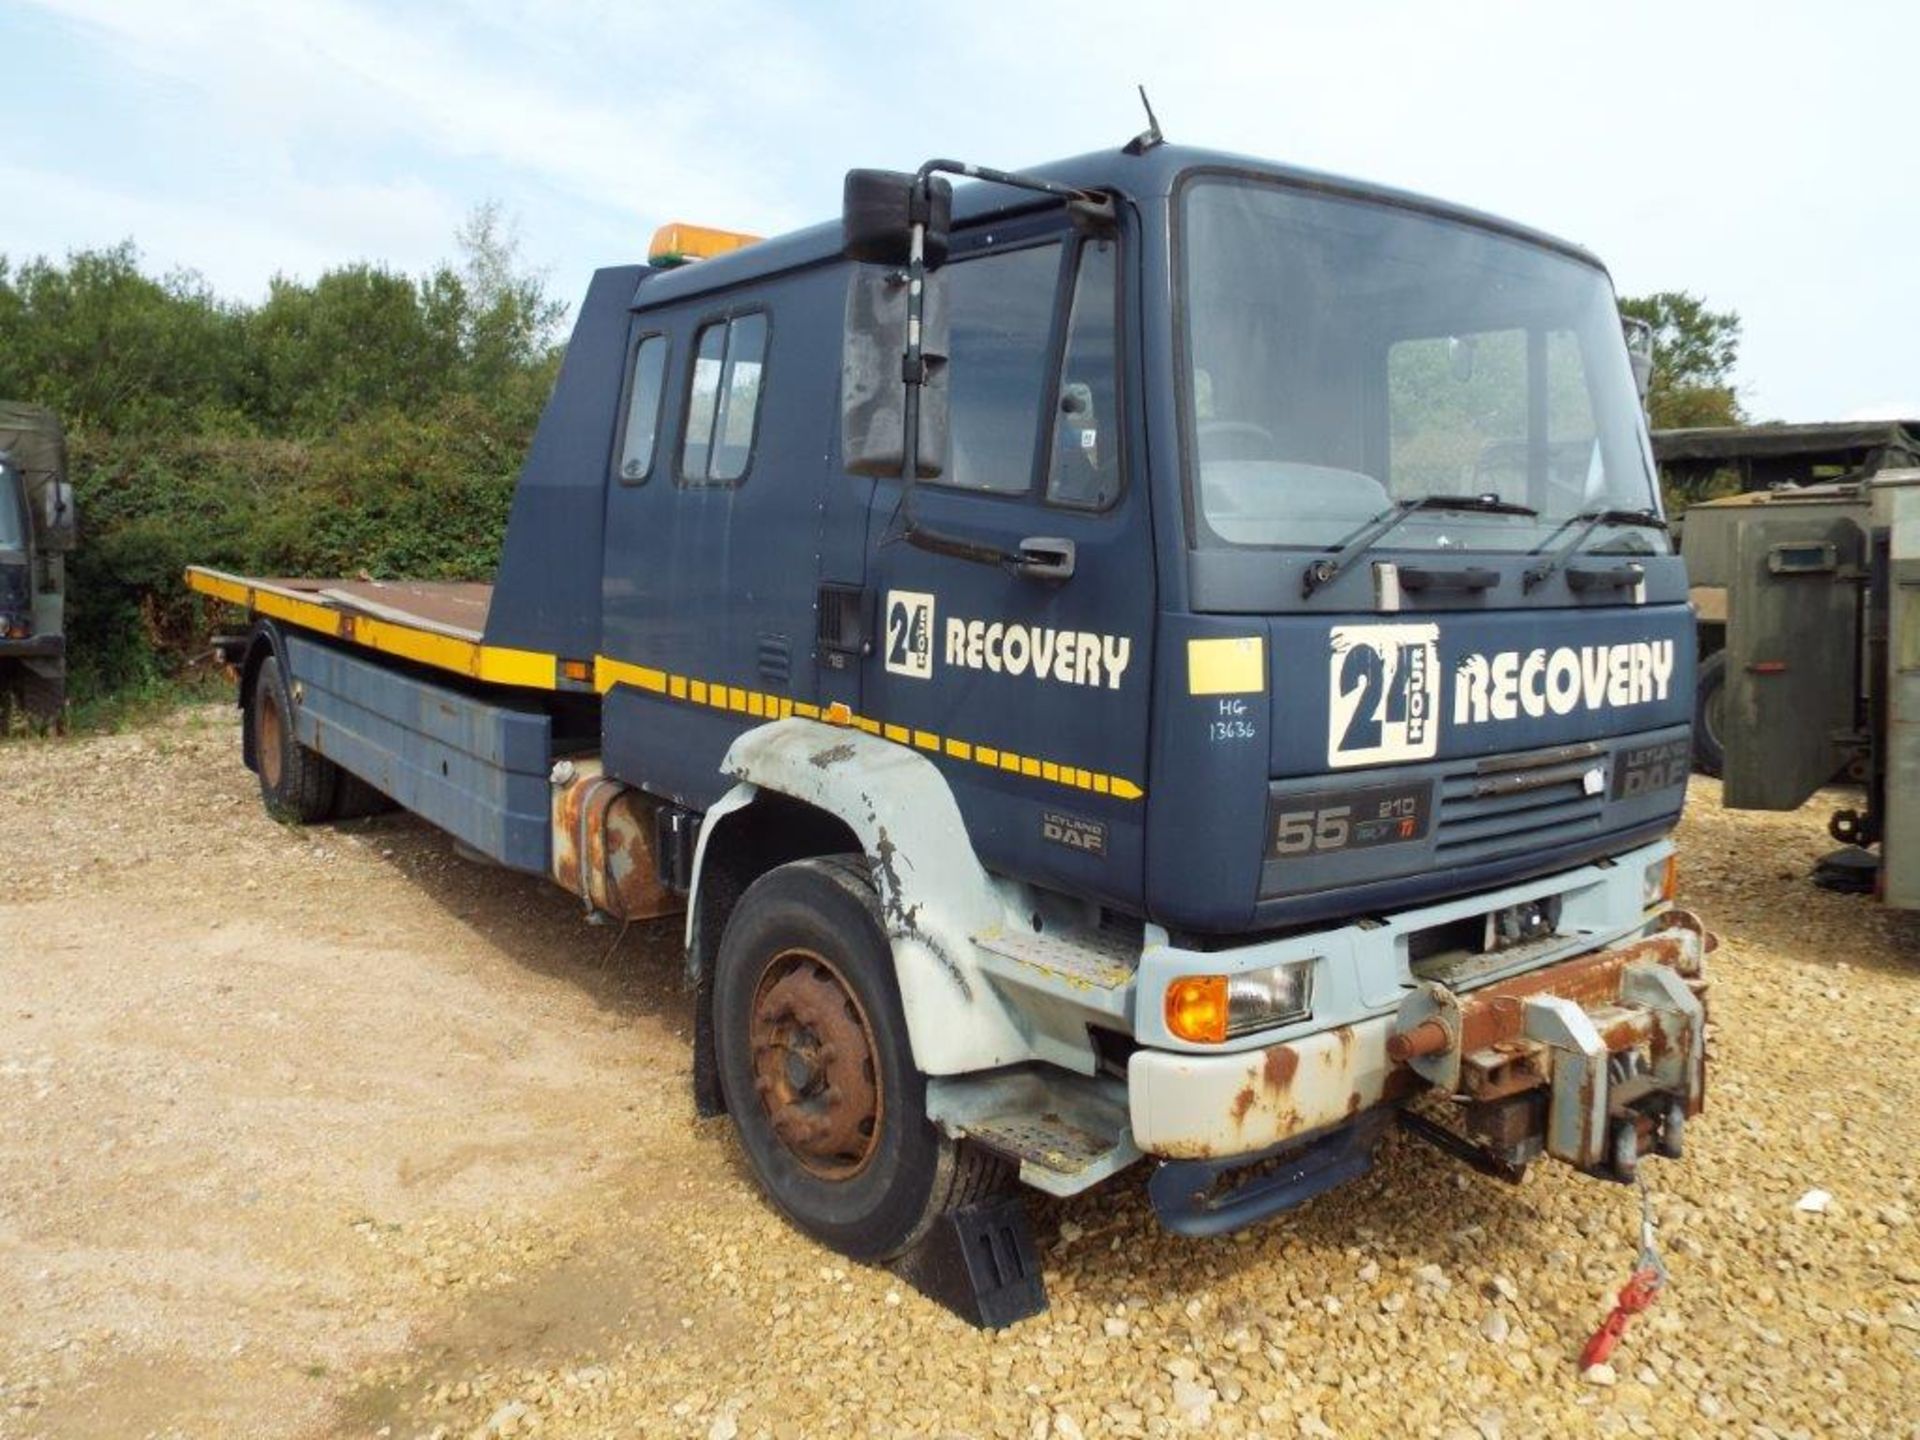 Leyland DAF 55 210 Crew Cab 18T Tilt and Slide Recovery Vehicle with Underlift and 2 x Winches